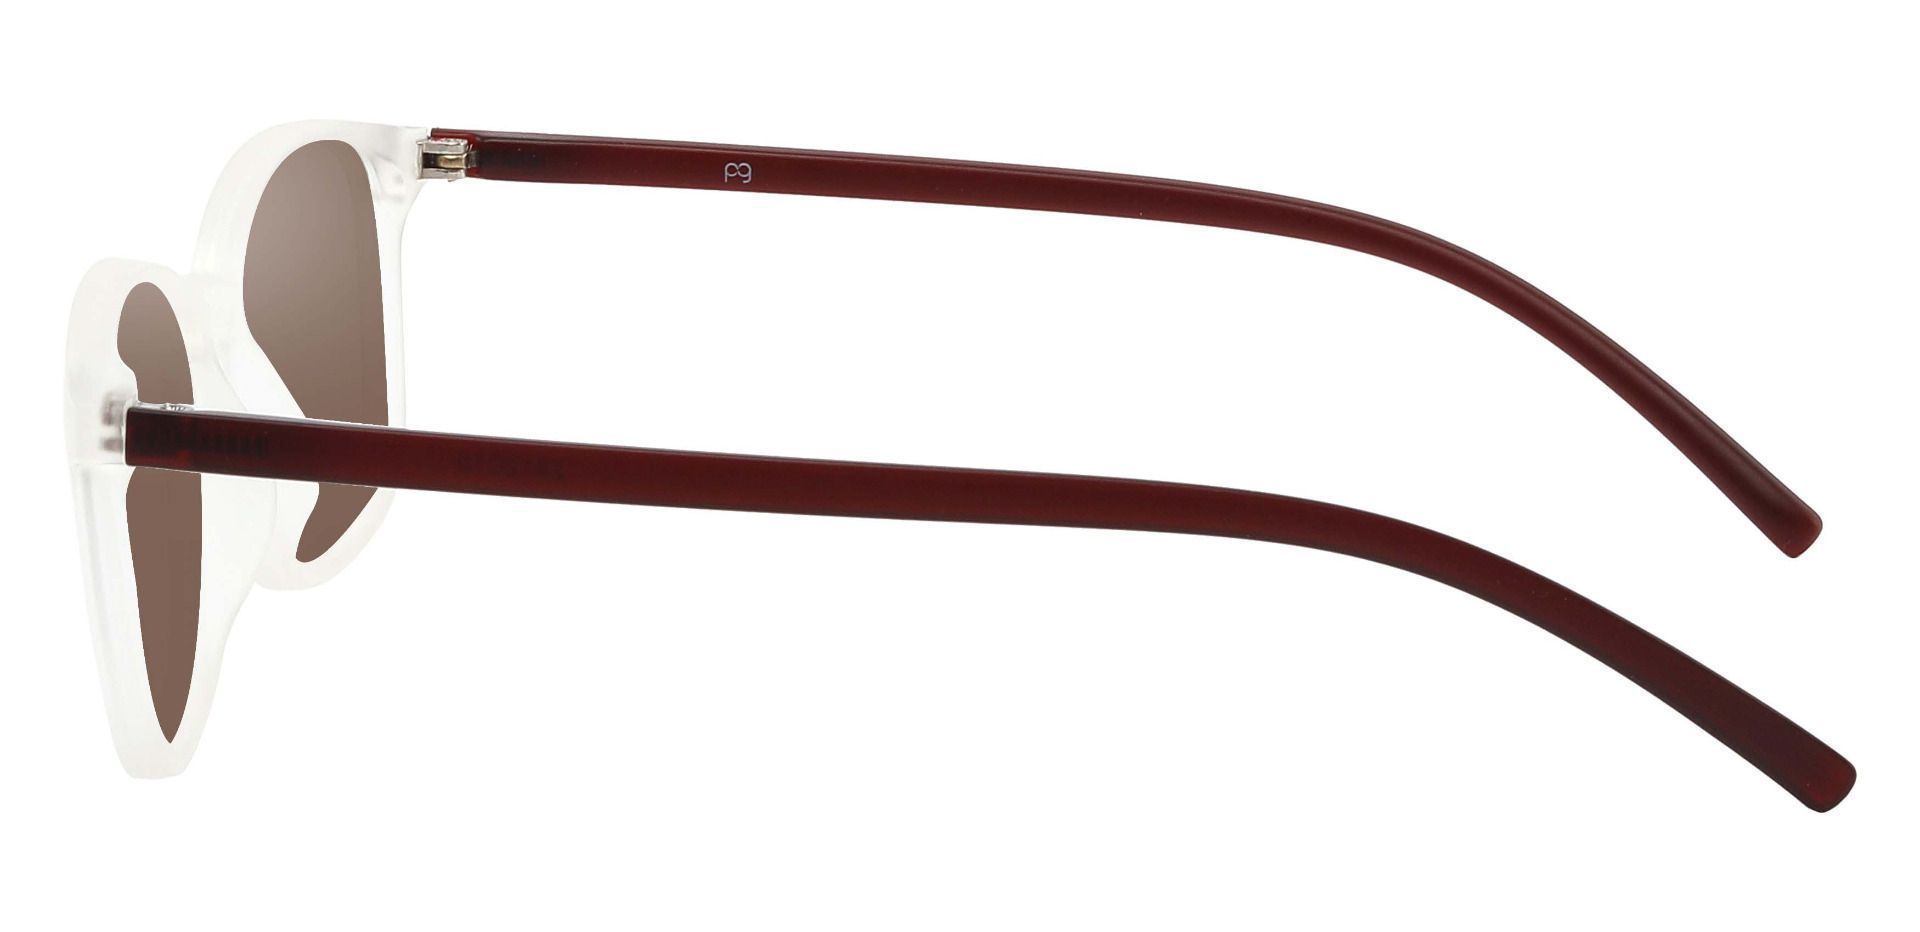 Onyx Square Non-Rx Sunglasses - Clear Frame With Brown Lenses